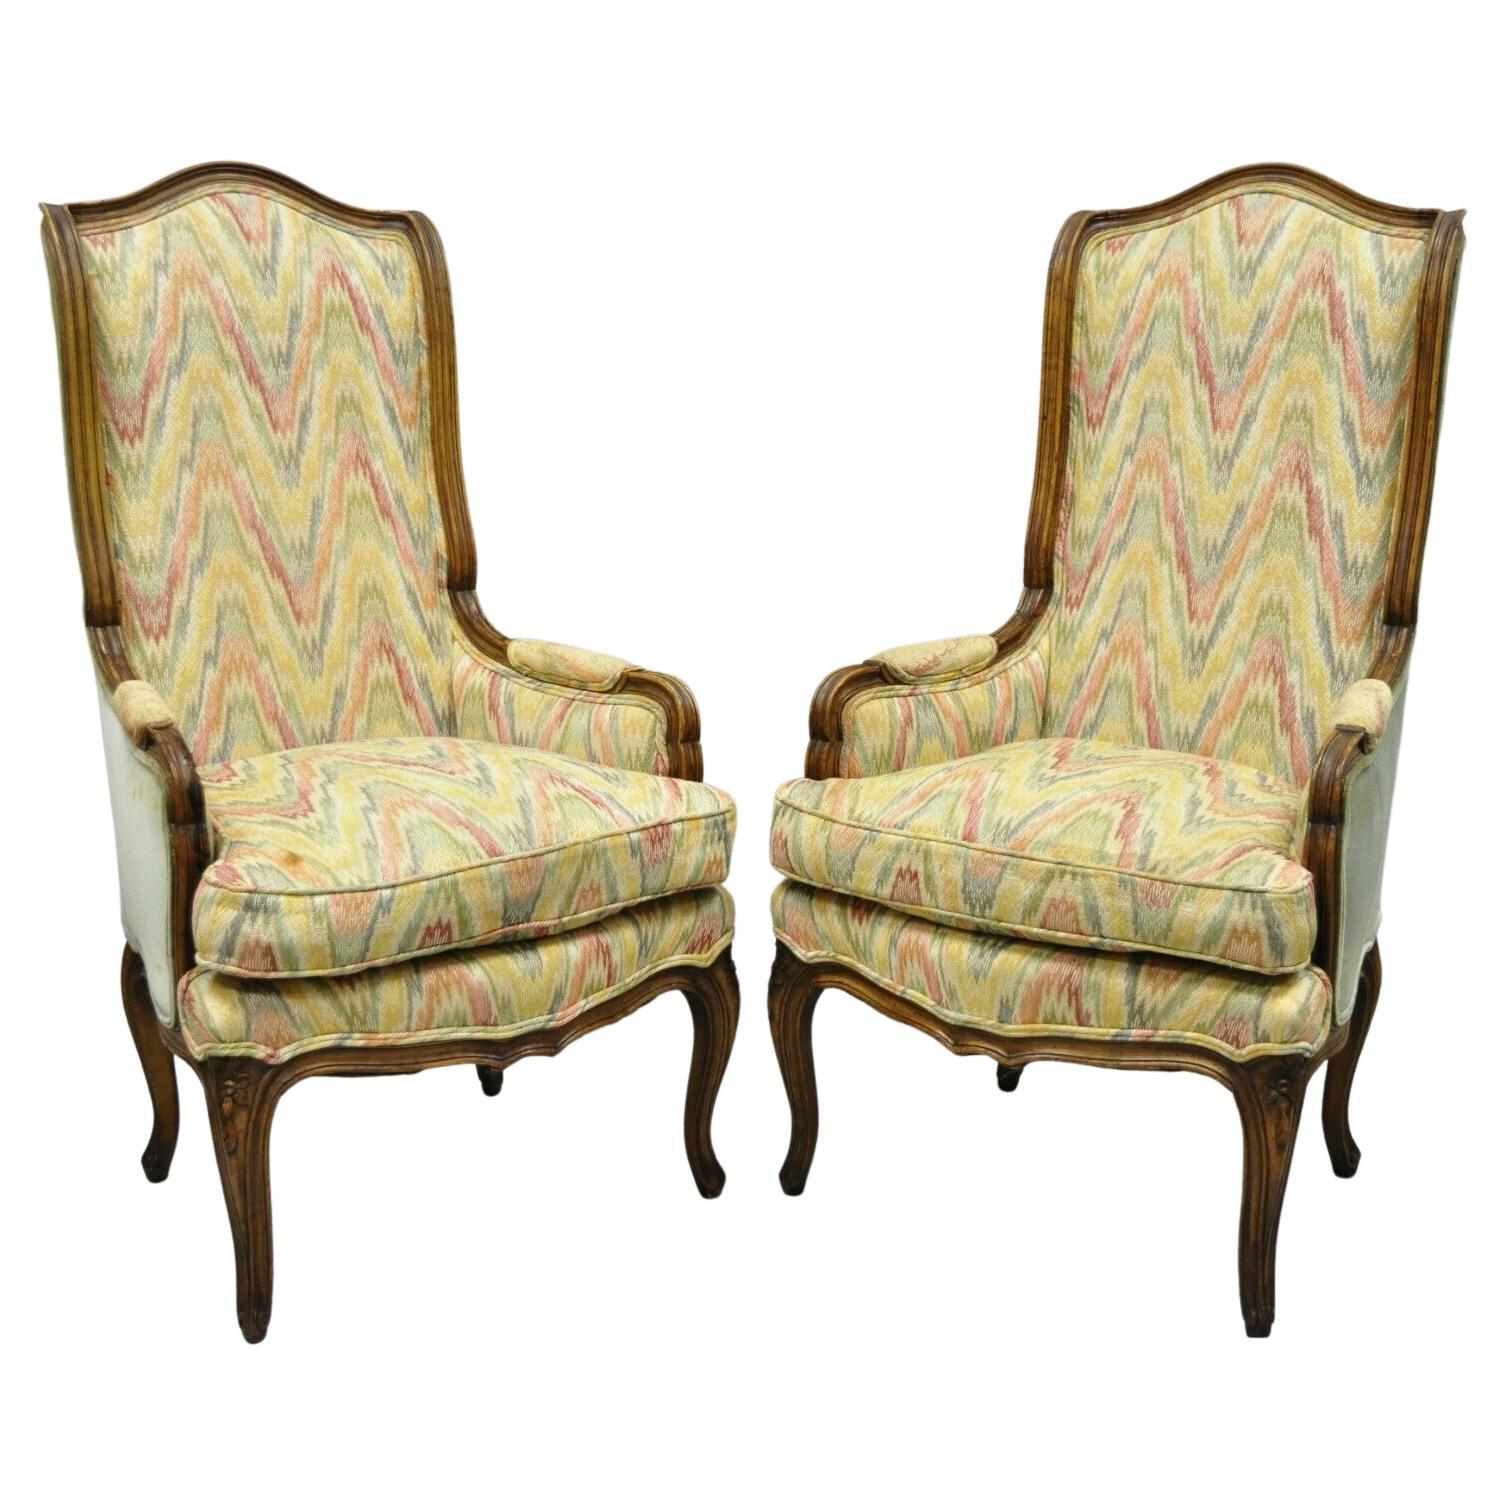 Vintage French Provincial Louis XV Country Narrow Tall Back Chairs 'A' - a Pair